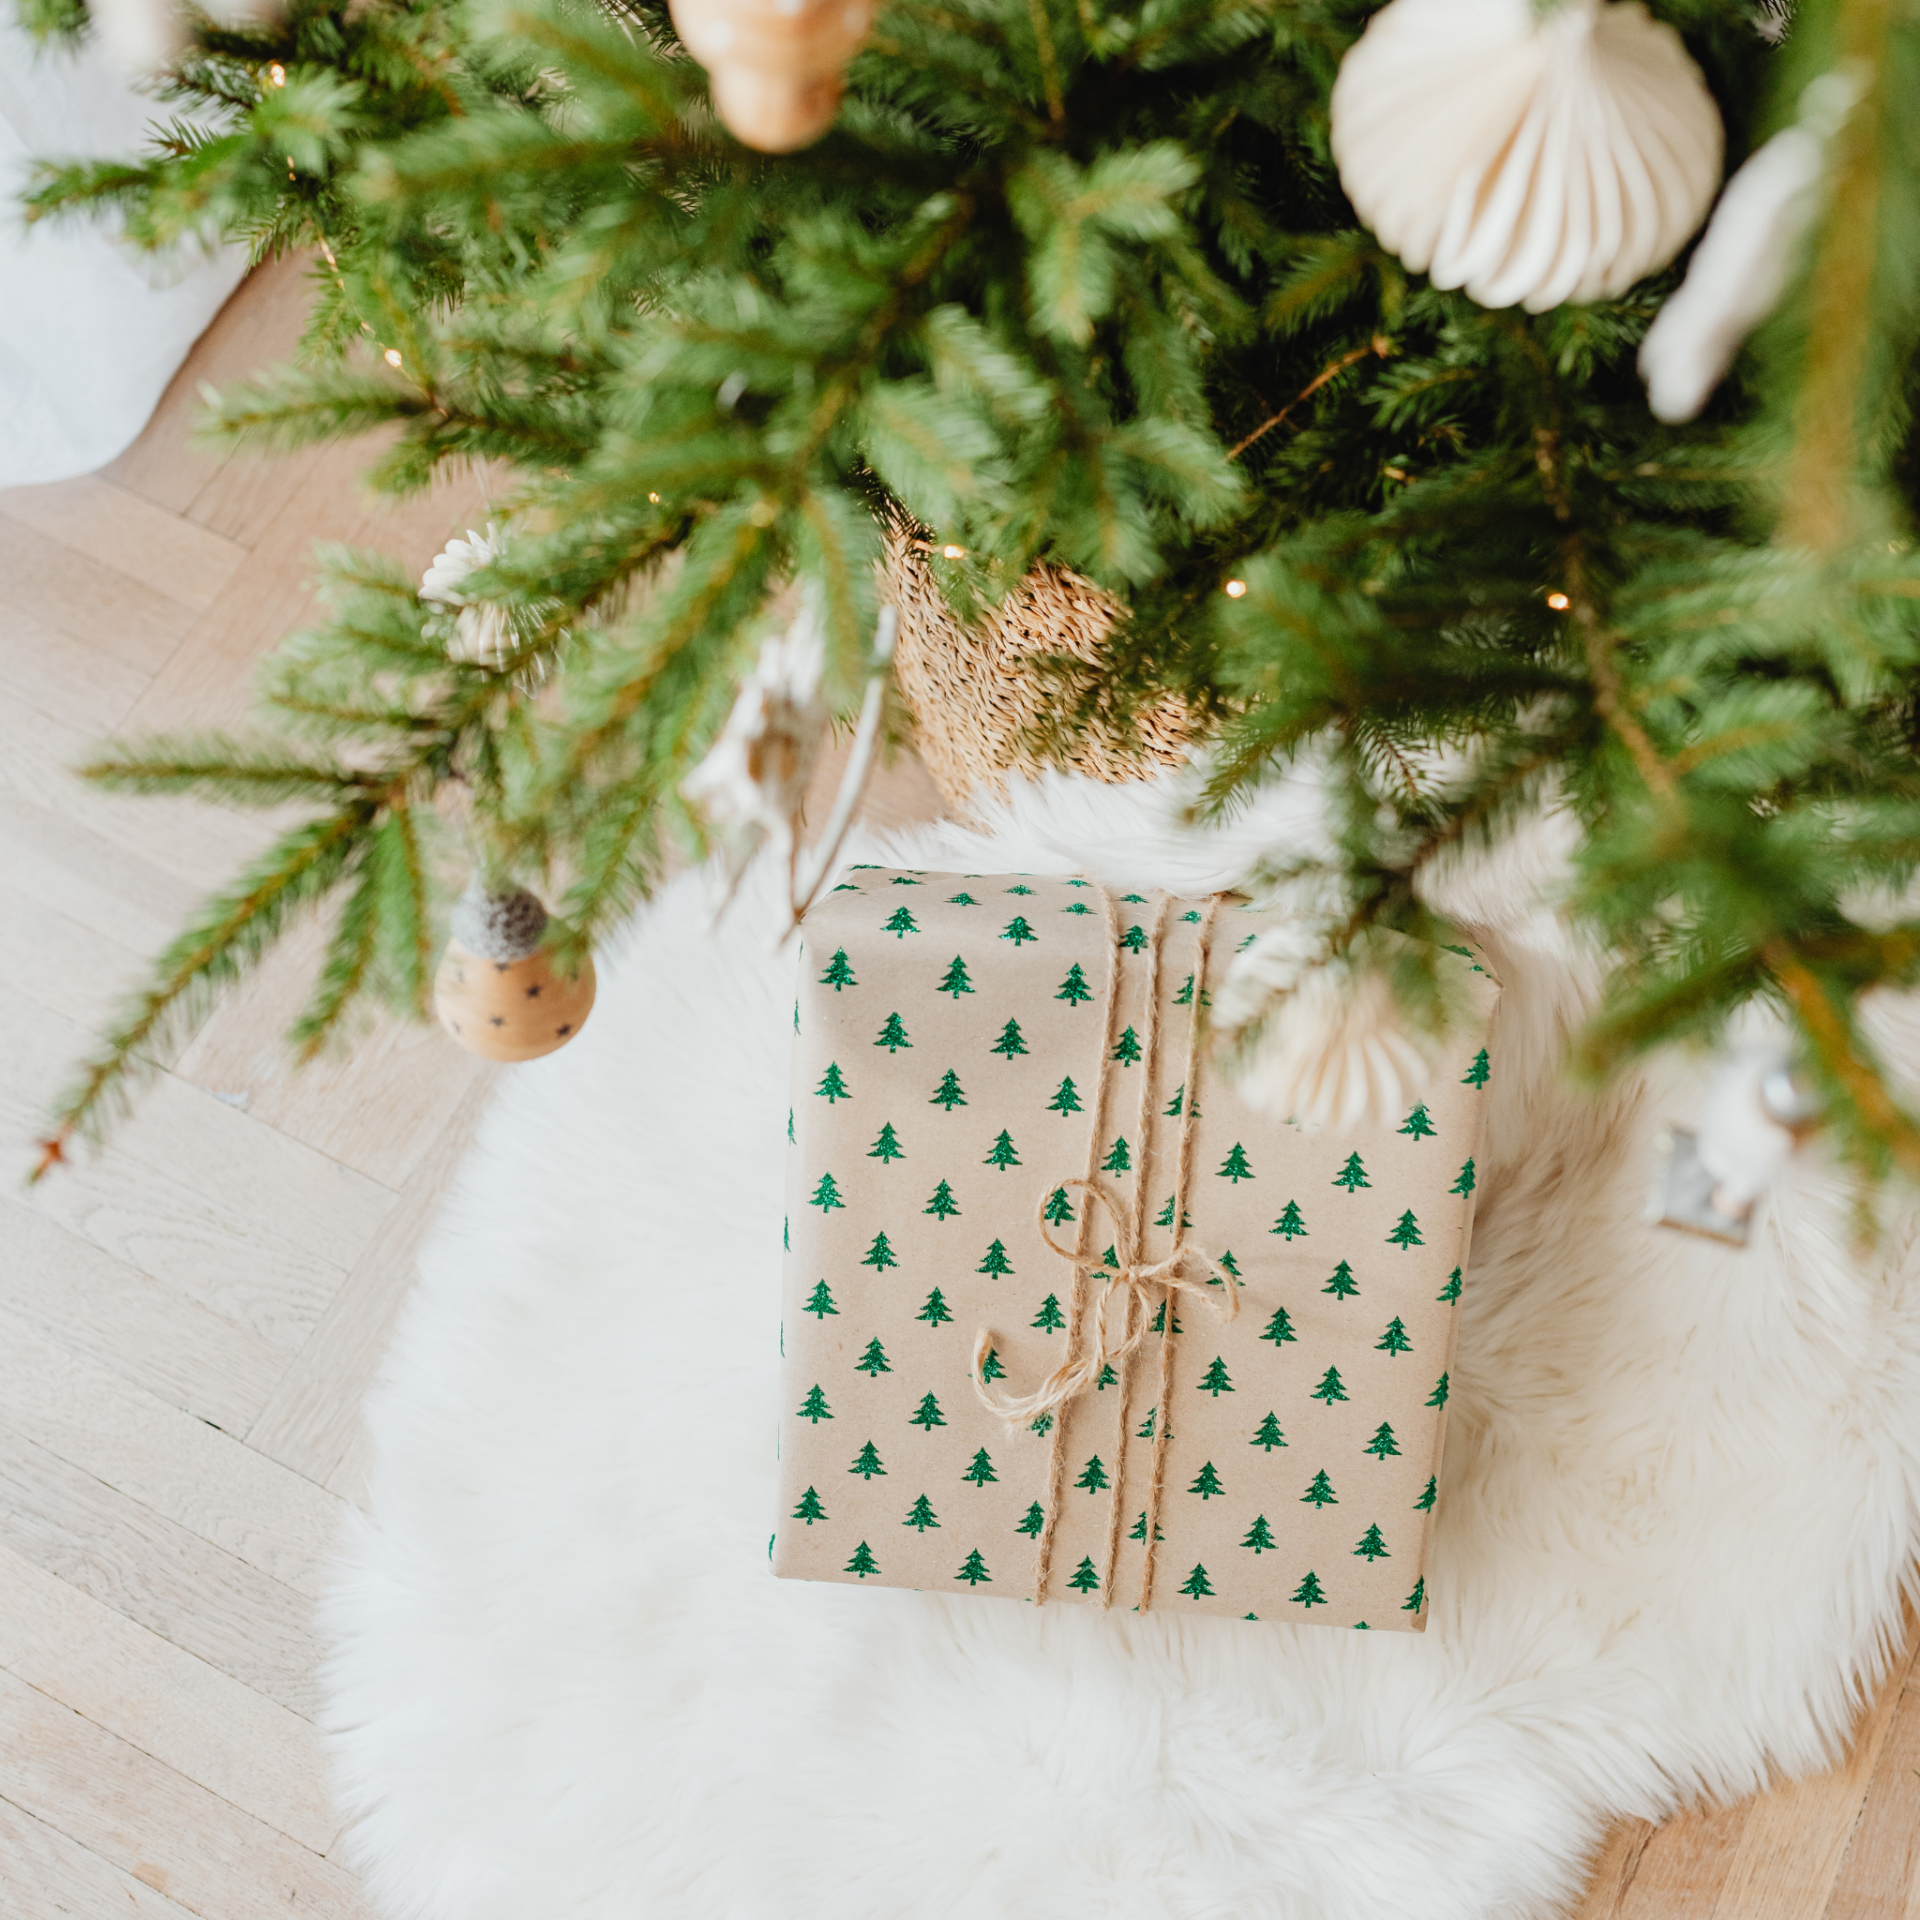 https://inspiretoglow.com/wp-content/uploads/2020/12/15-last-minute-Christmas-gift-ideas-Header-Present-under-the-Christmas-tree.png